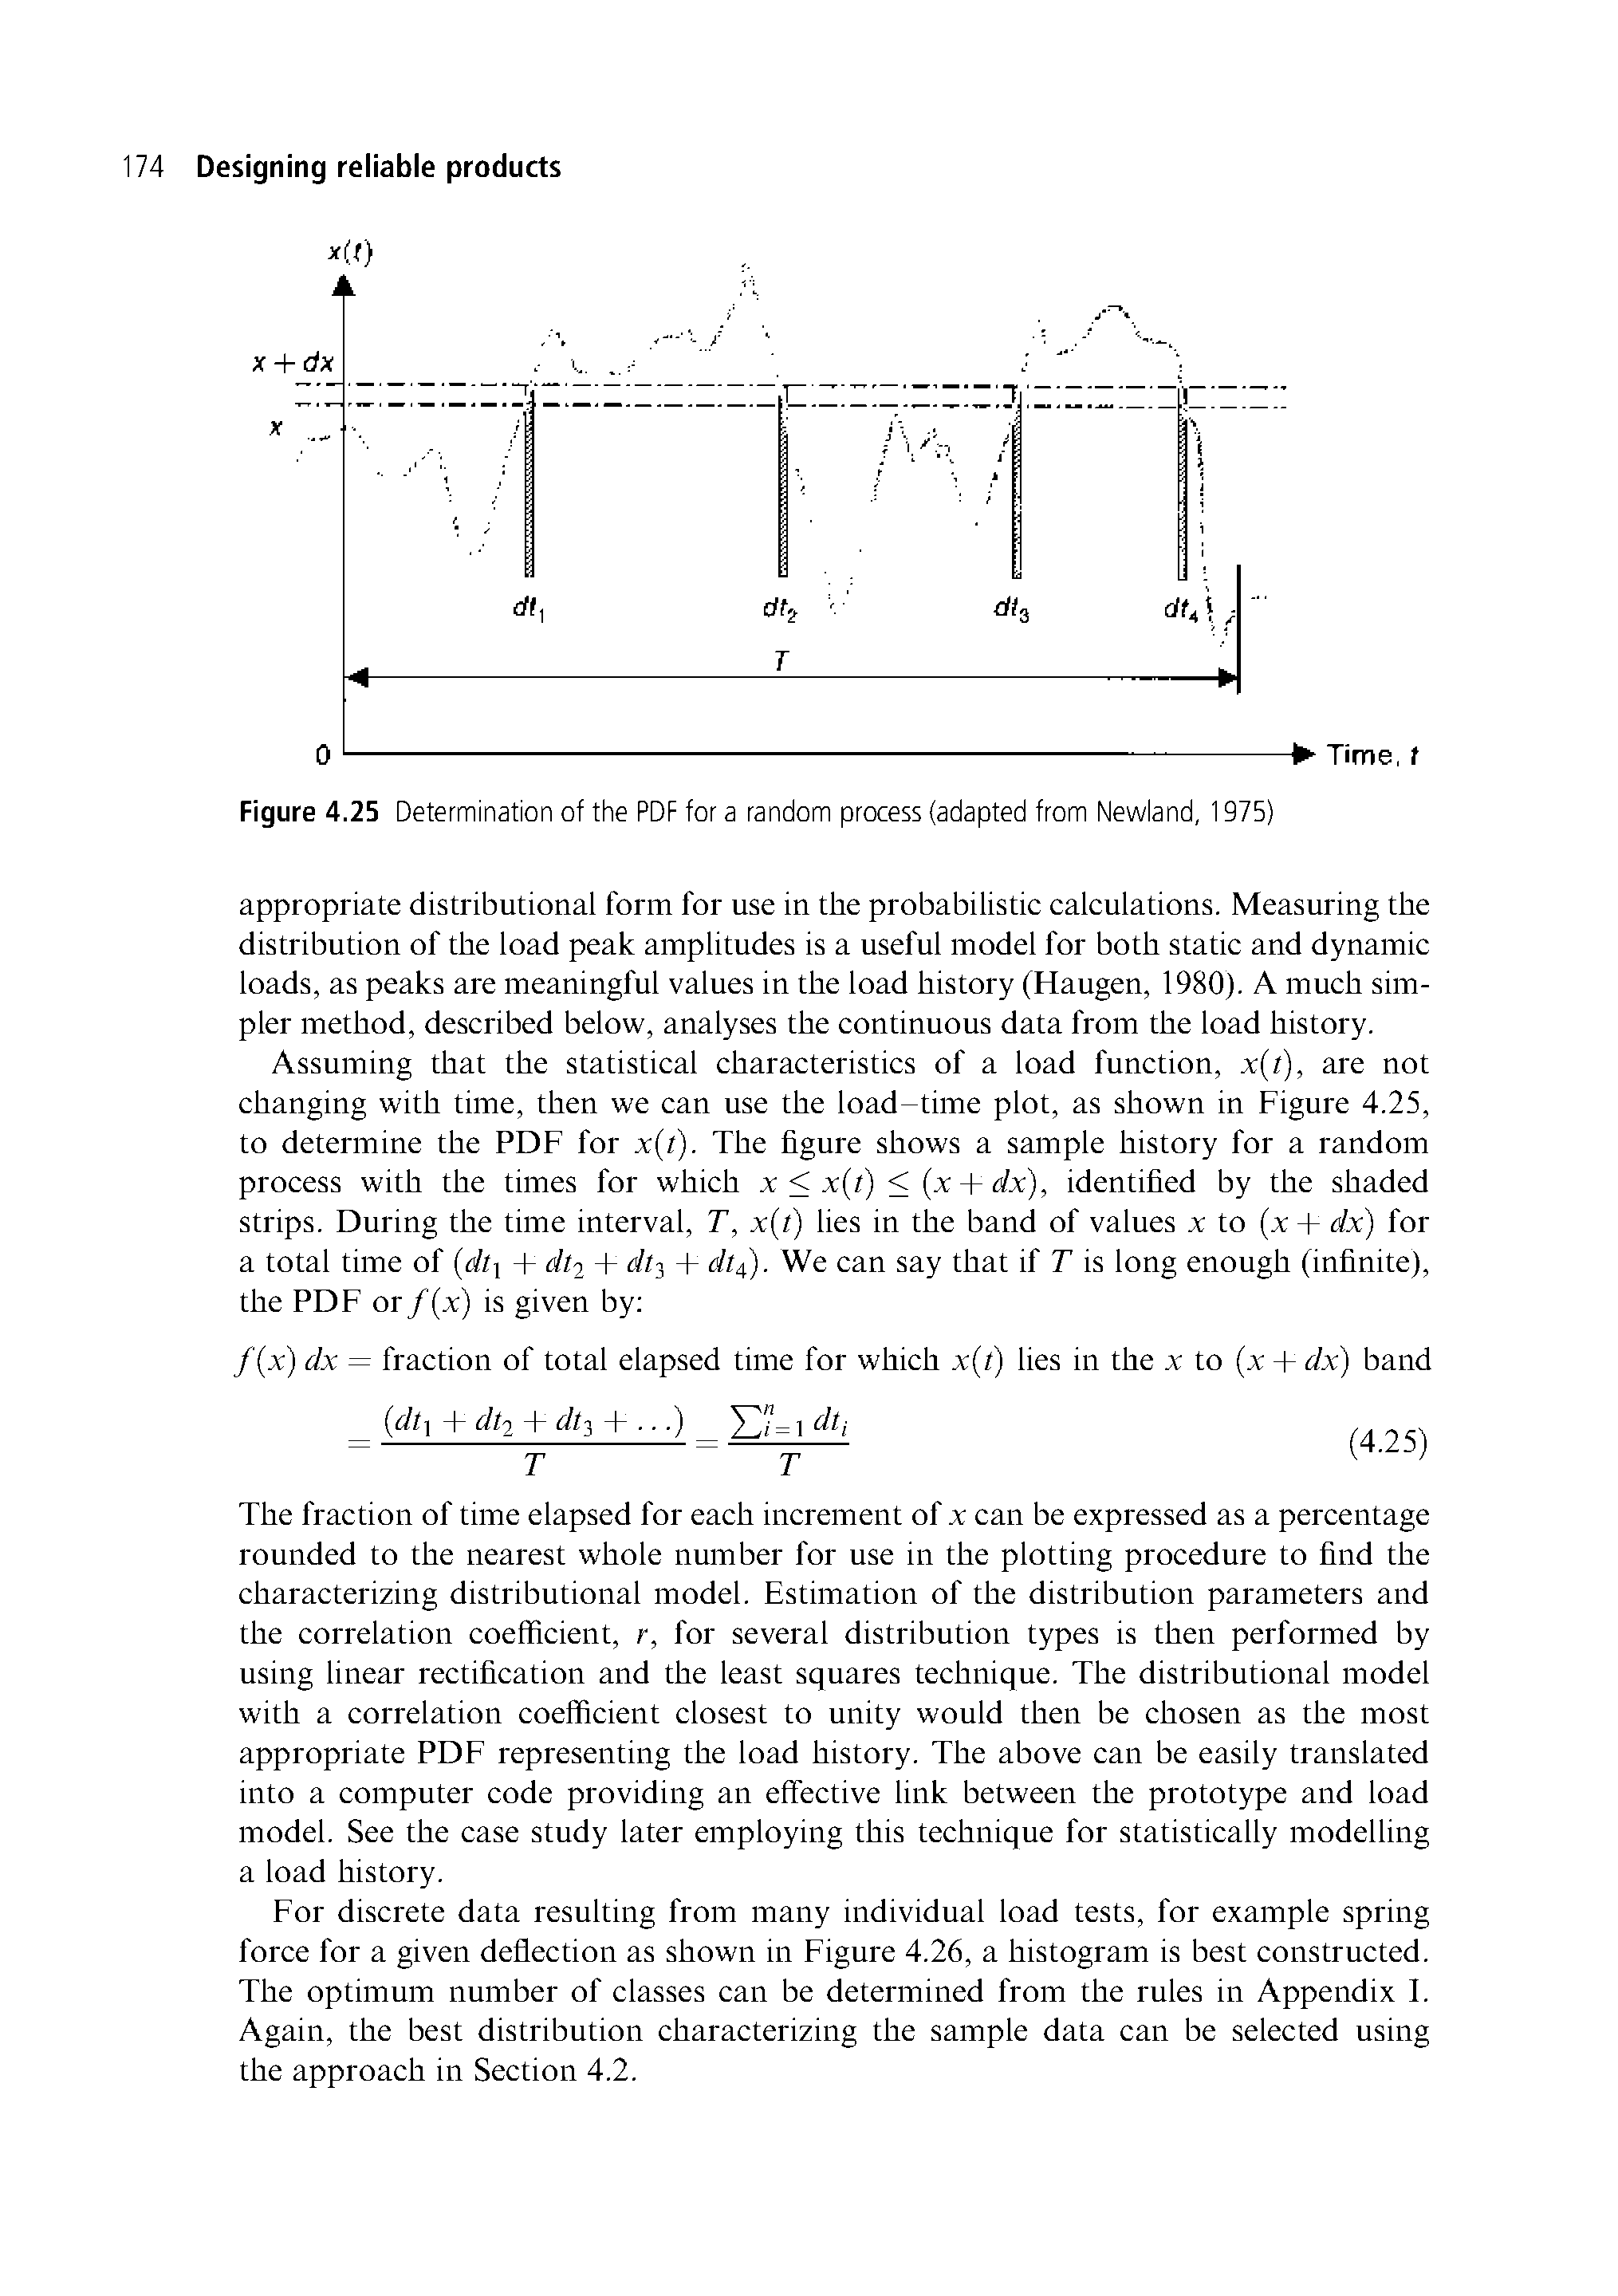 Figure 4.25 Determination of the PDF for a random process (adapted from Newland, 1975)...